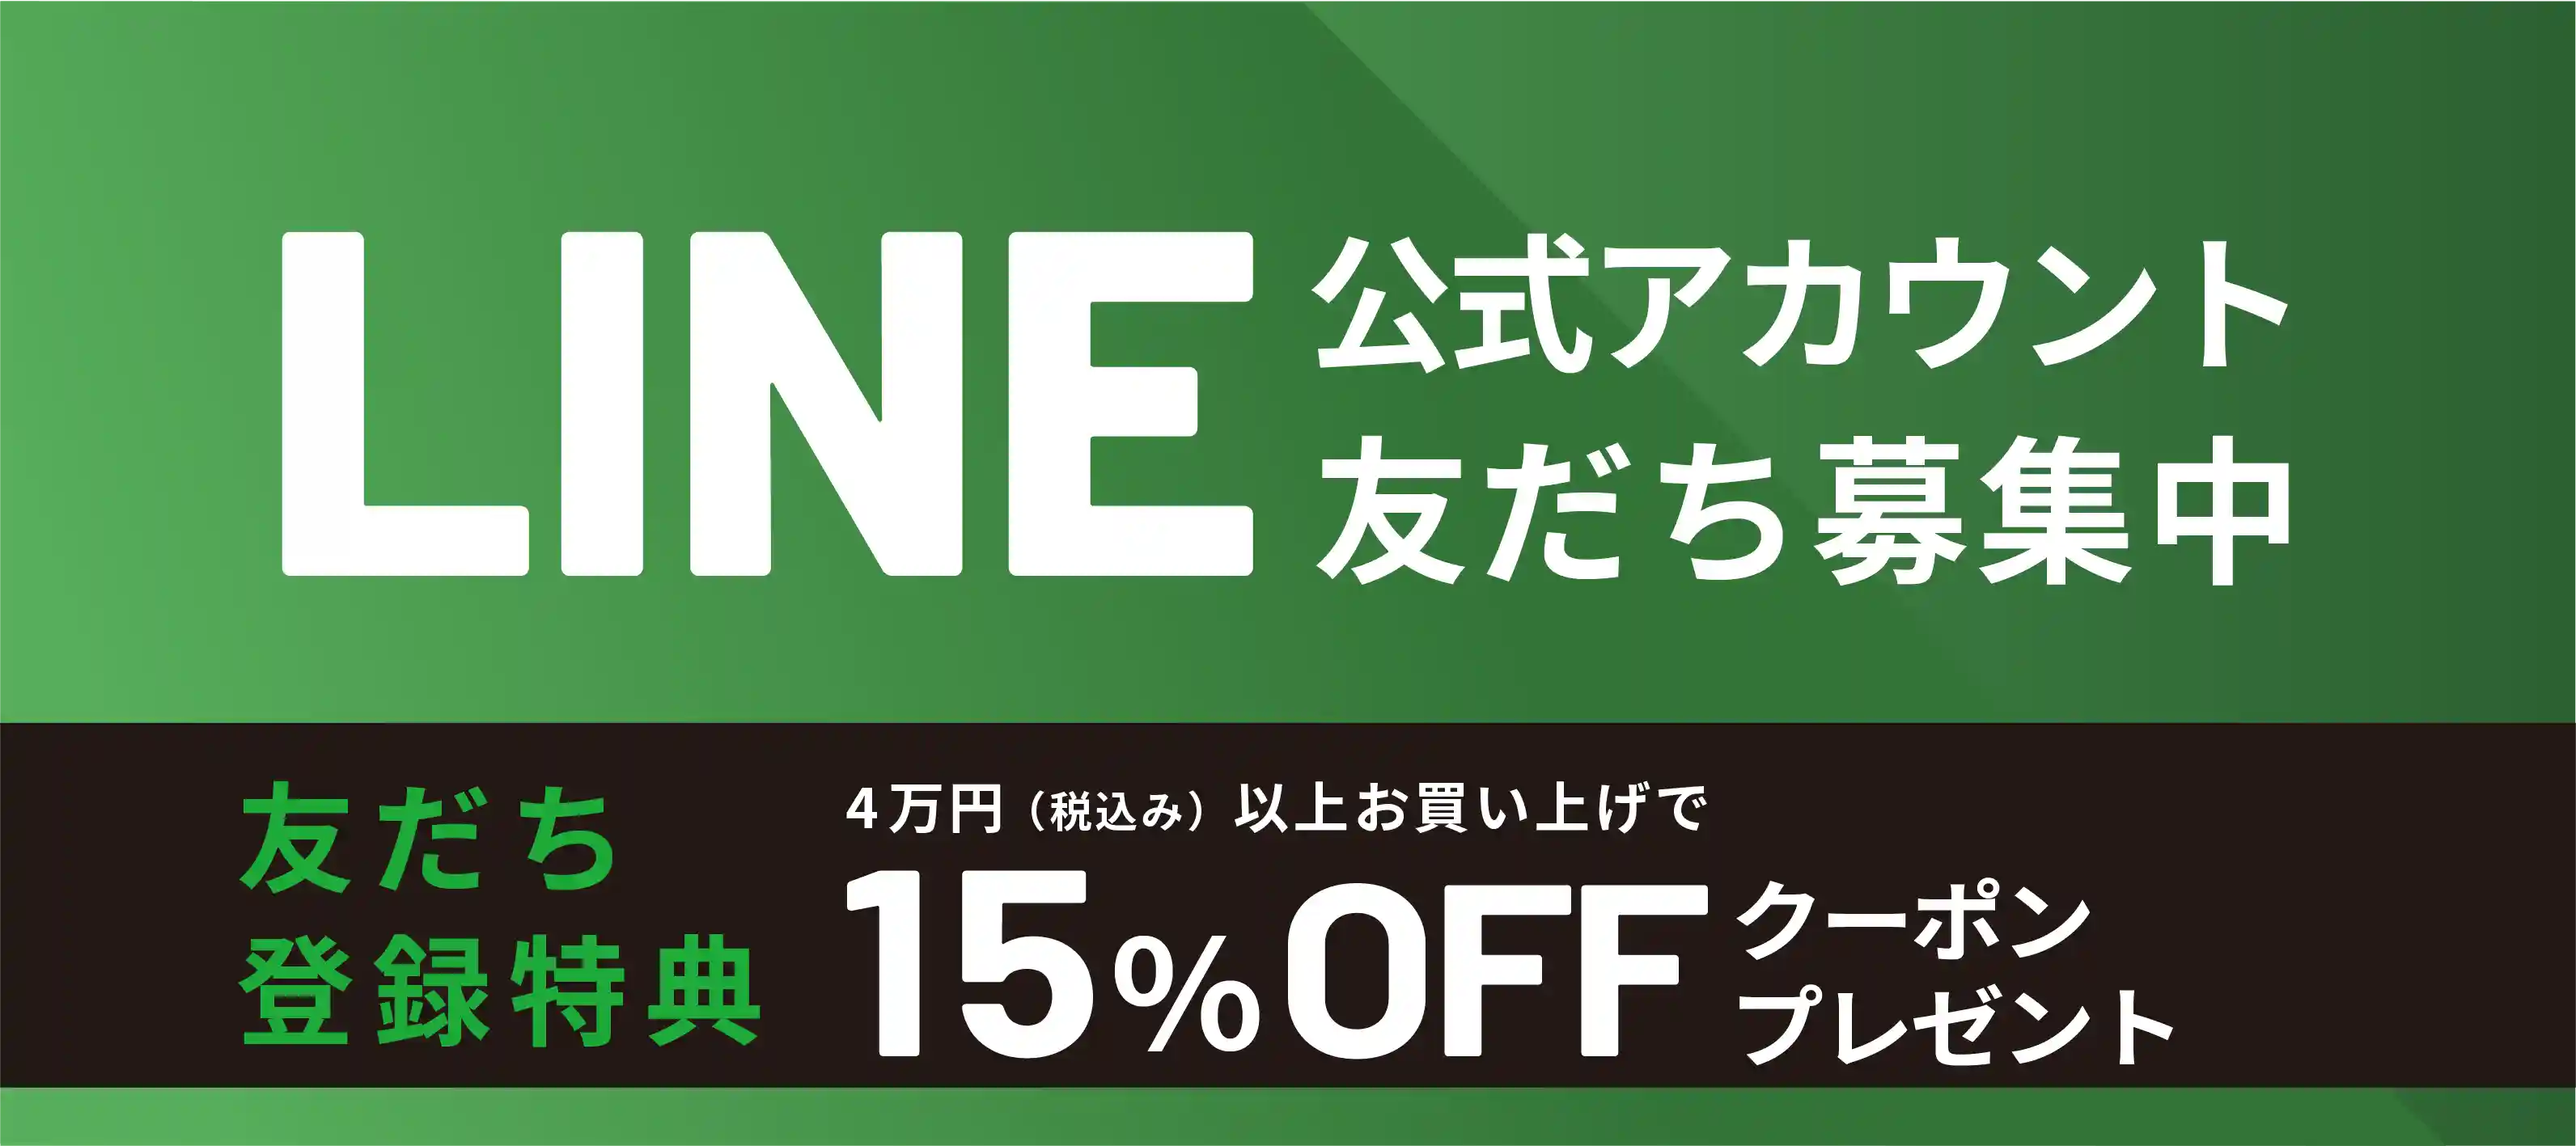 LINE公式アカウント 友達登録で15%OFFクーポンプレゼント